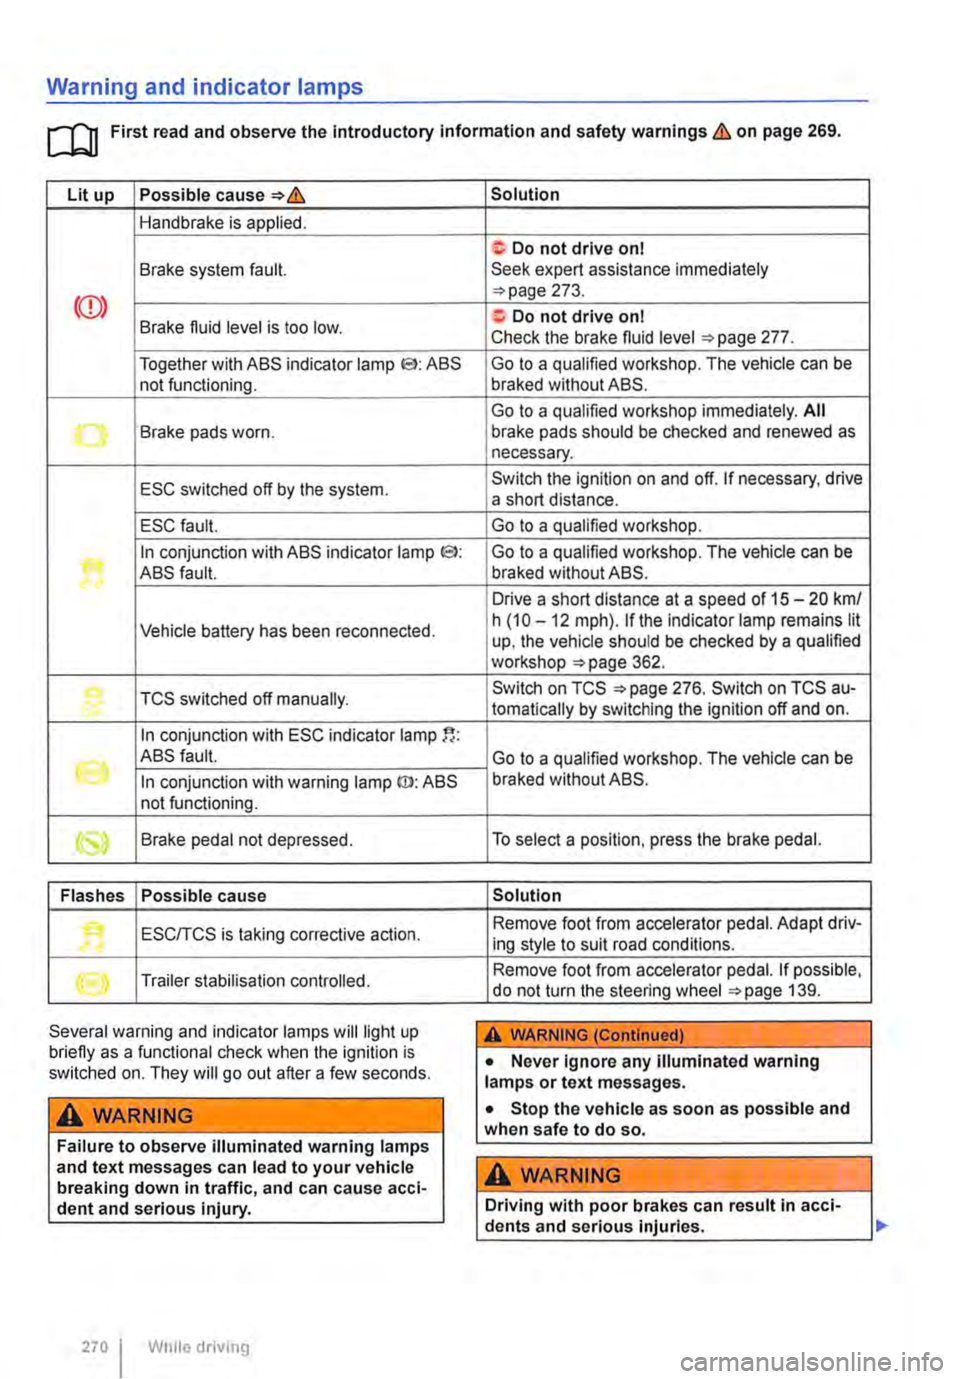 VOLKSWAGEN TRANSPORTER 2012  Owners Manual Warning and indicator lamps 
[Q First read and observe the Introductory information and safety warnings & on page 269. 
Lit up Possible cause=>& 
Handbrake is applied. 
Brake system fault. 
<CD> Brake